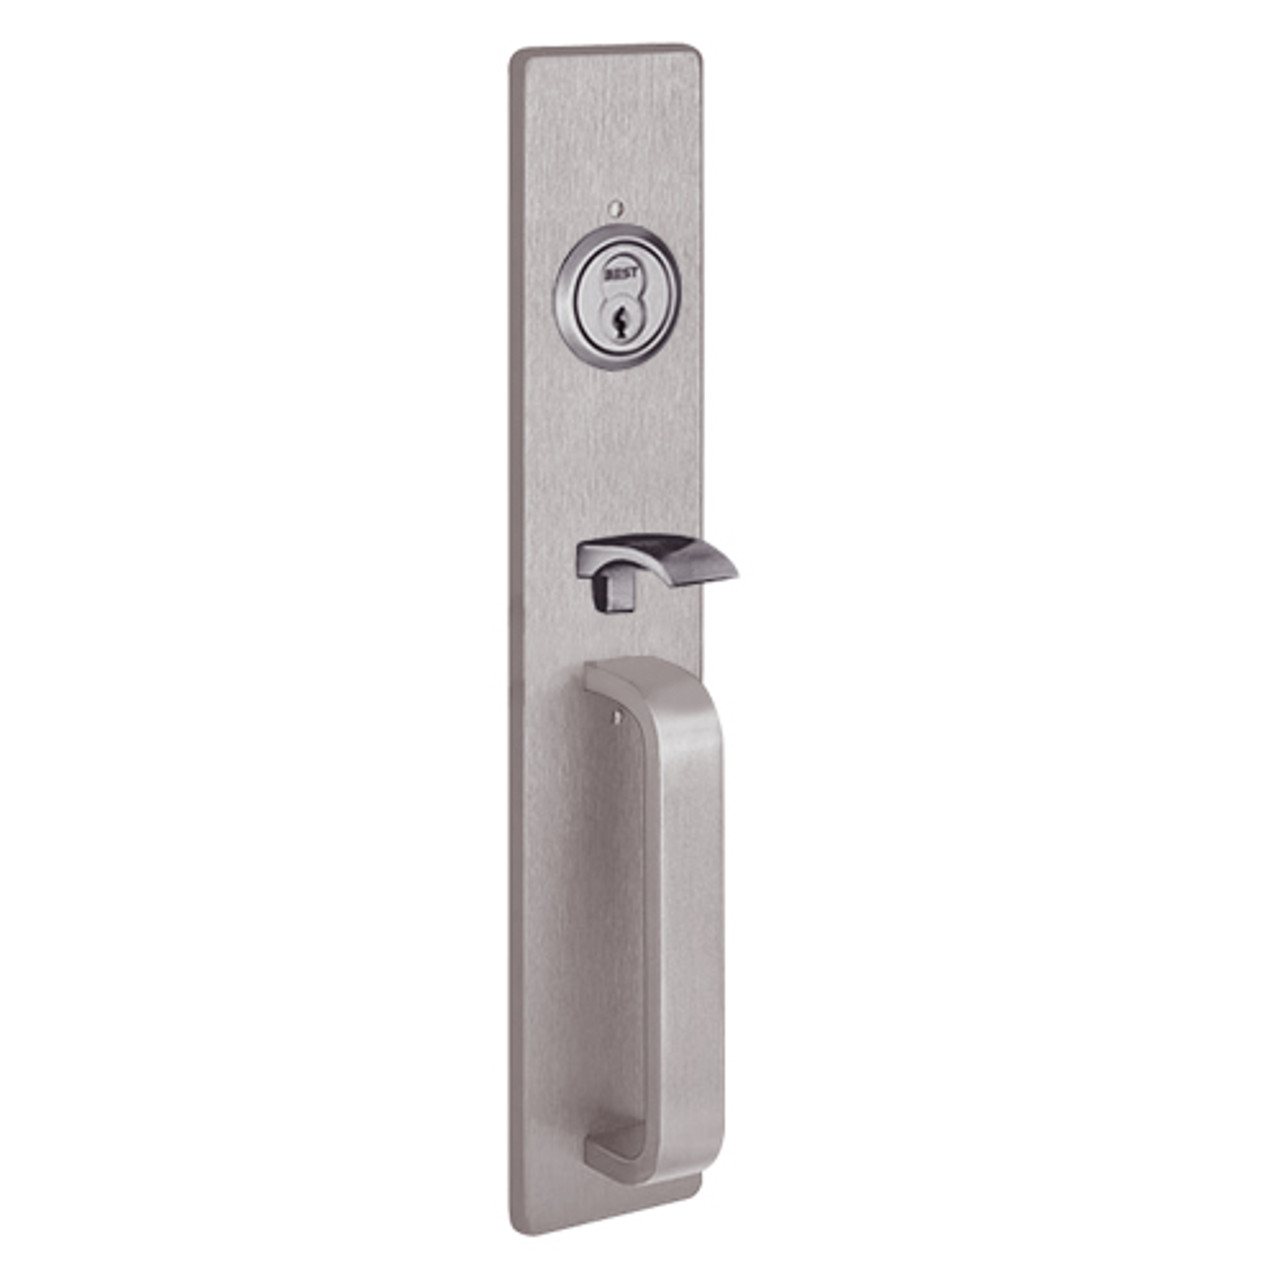 RM1705A-630 PHI Key Controls Thumb Piece Retrofit Trim with A Design Pull for Apex and Olympian Series Exit Device in Satin Stainless Steel Finish